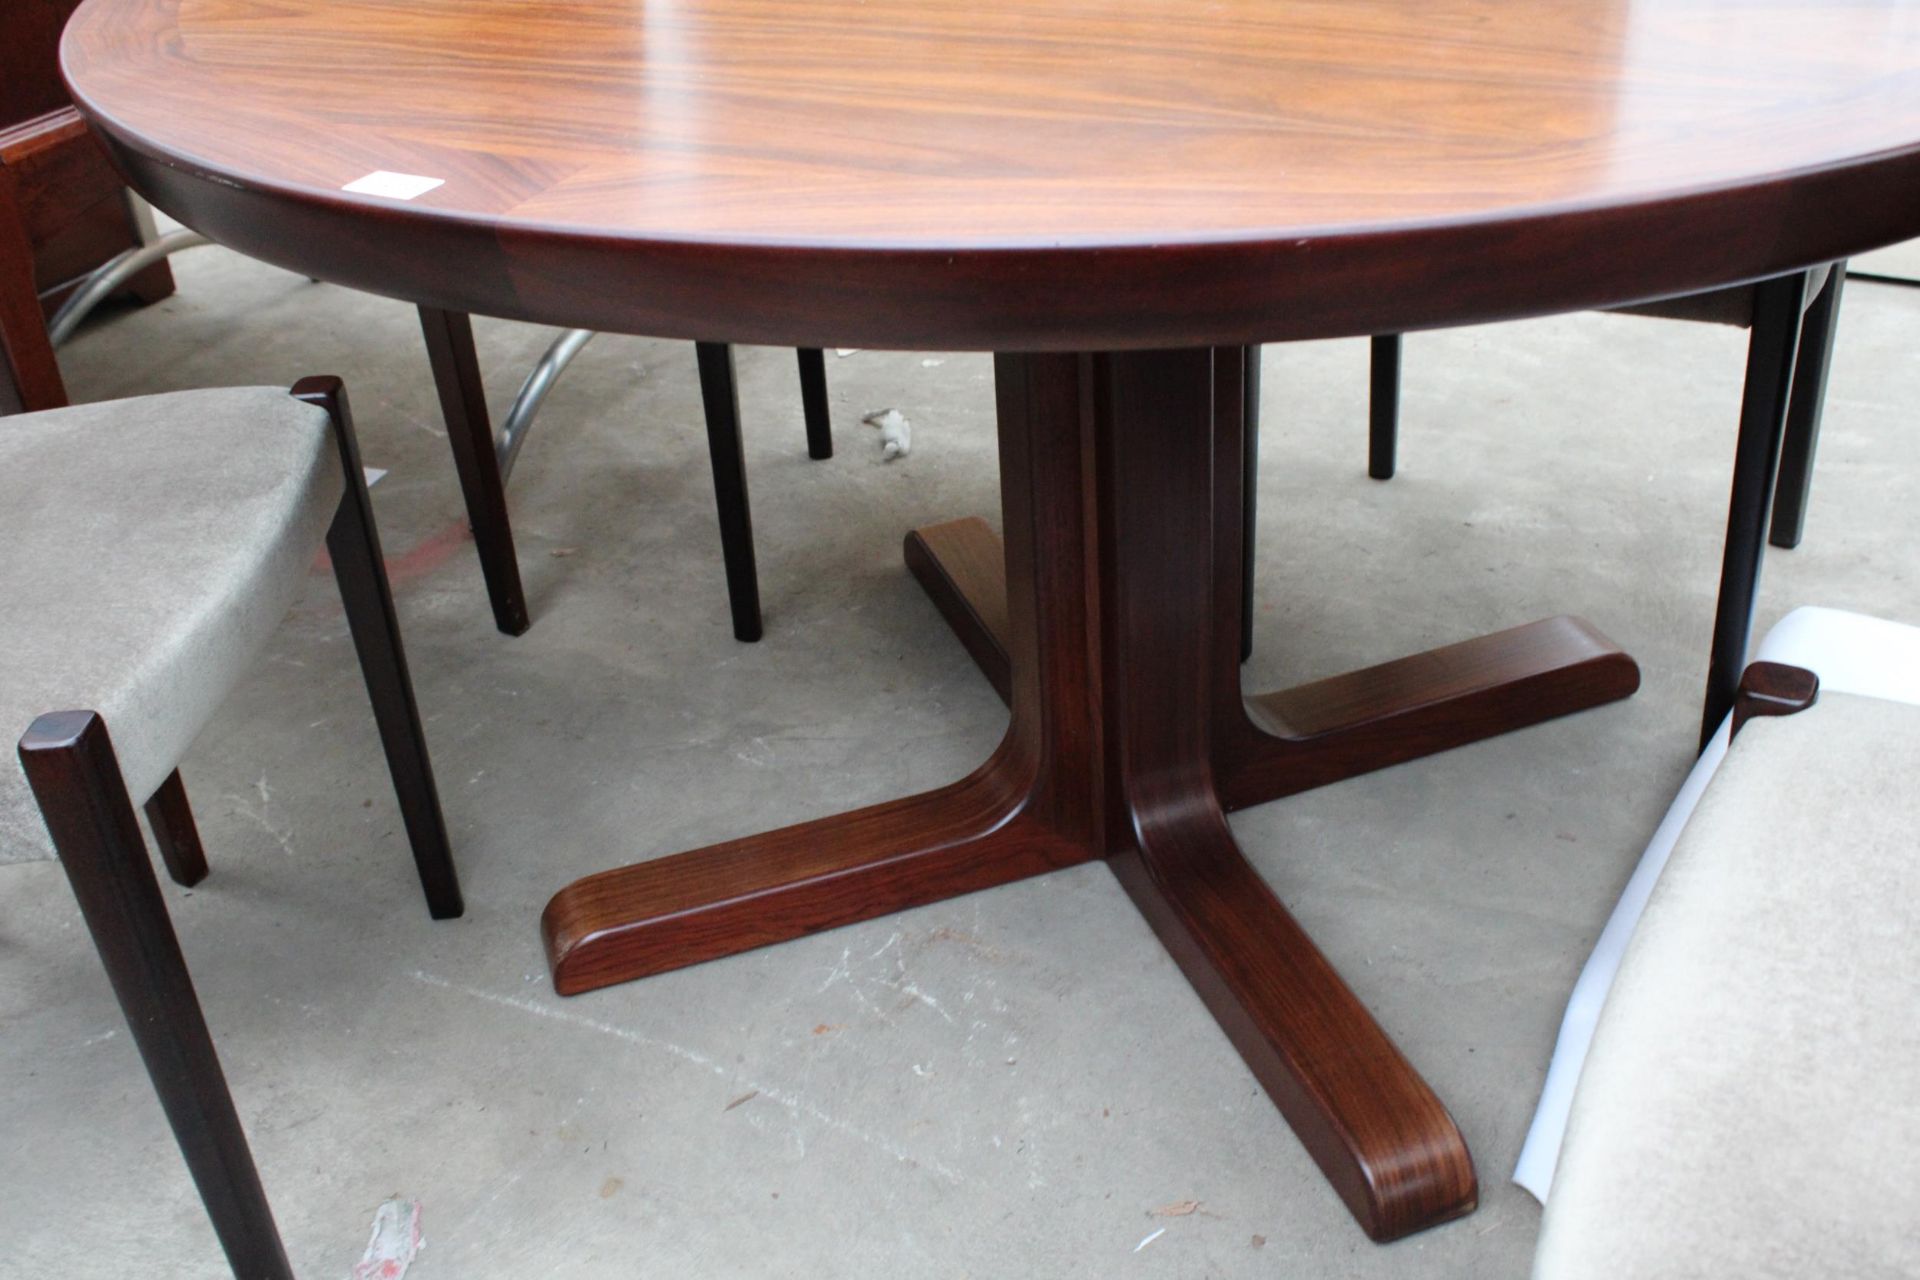 A RETRO HARDWOOD 49" DIAMETER EXTENDING DINING TABLE WITH TWO LEAVES (20" EACH) AND FOUR DINING - Bild 7 aus 7